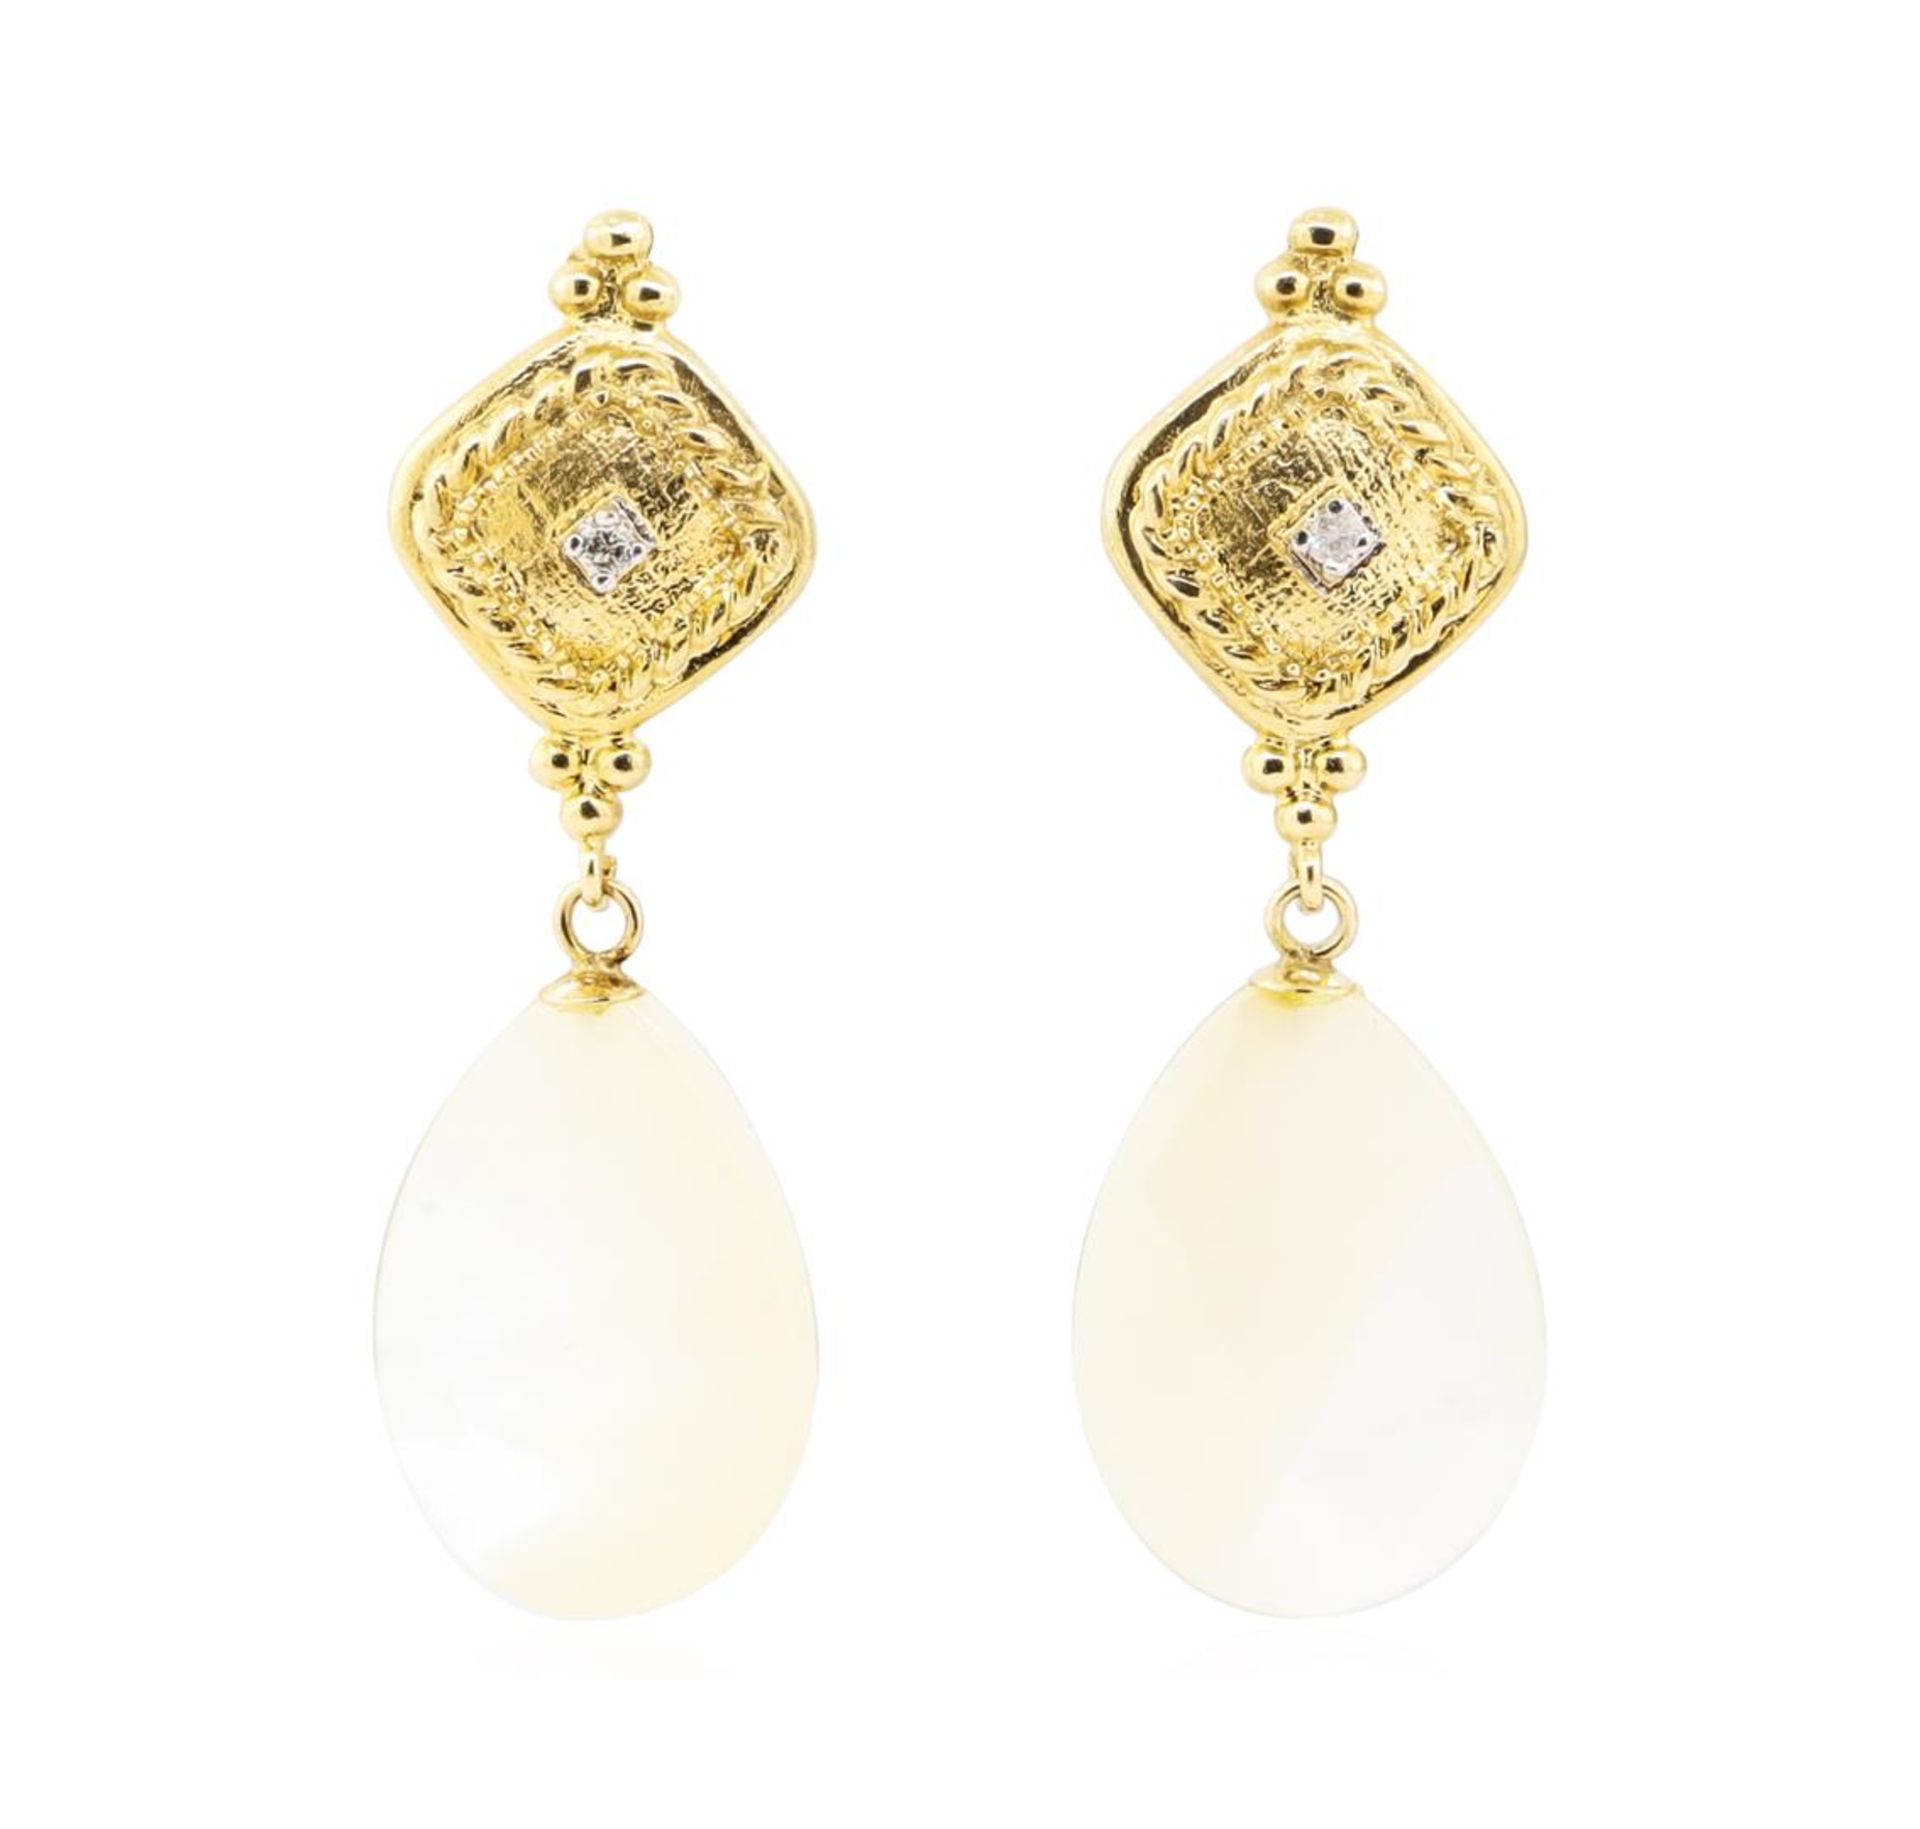 0.04ctw Diamond and Mother of Pearl Dangle Earrings - 14KT Yellow Gold